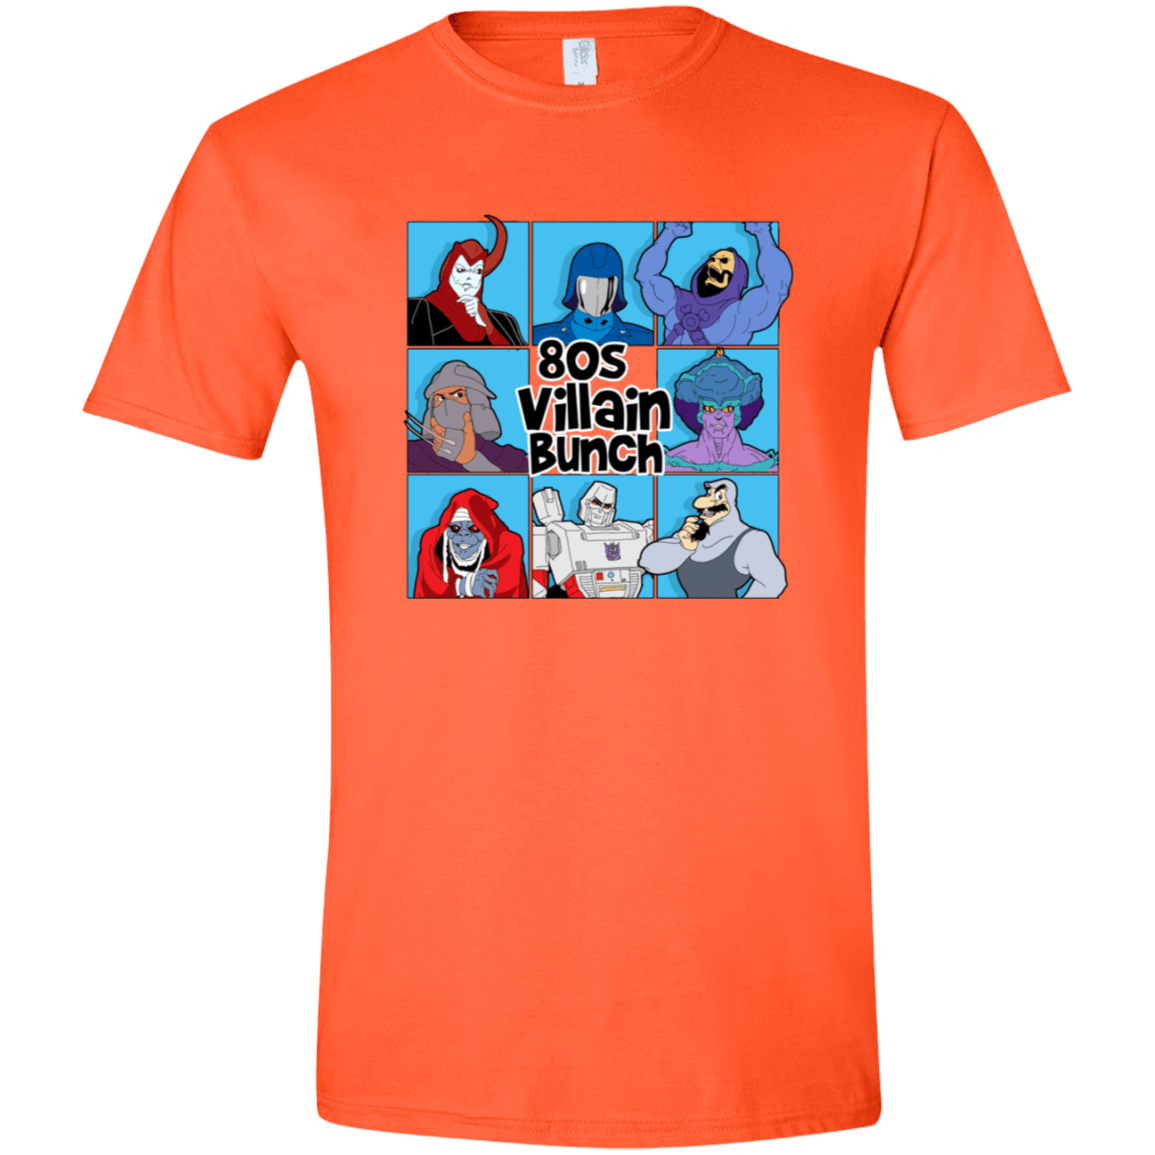 T-Shirts Orange / S 80s Villians Bunch Men's Semi-Fitted Softstyle